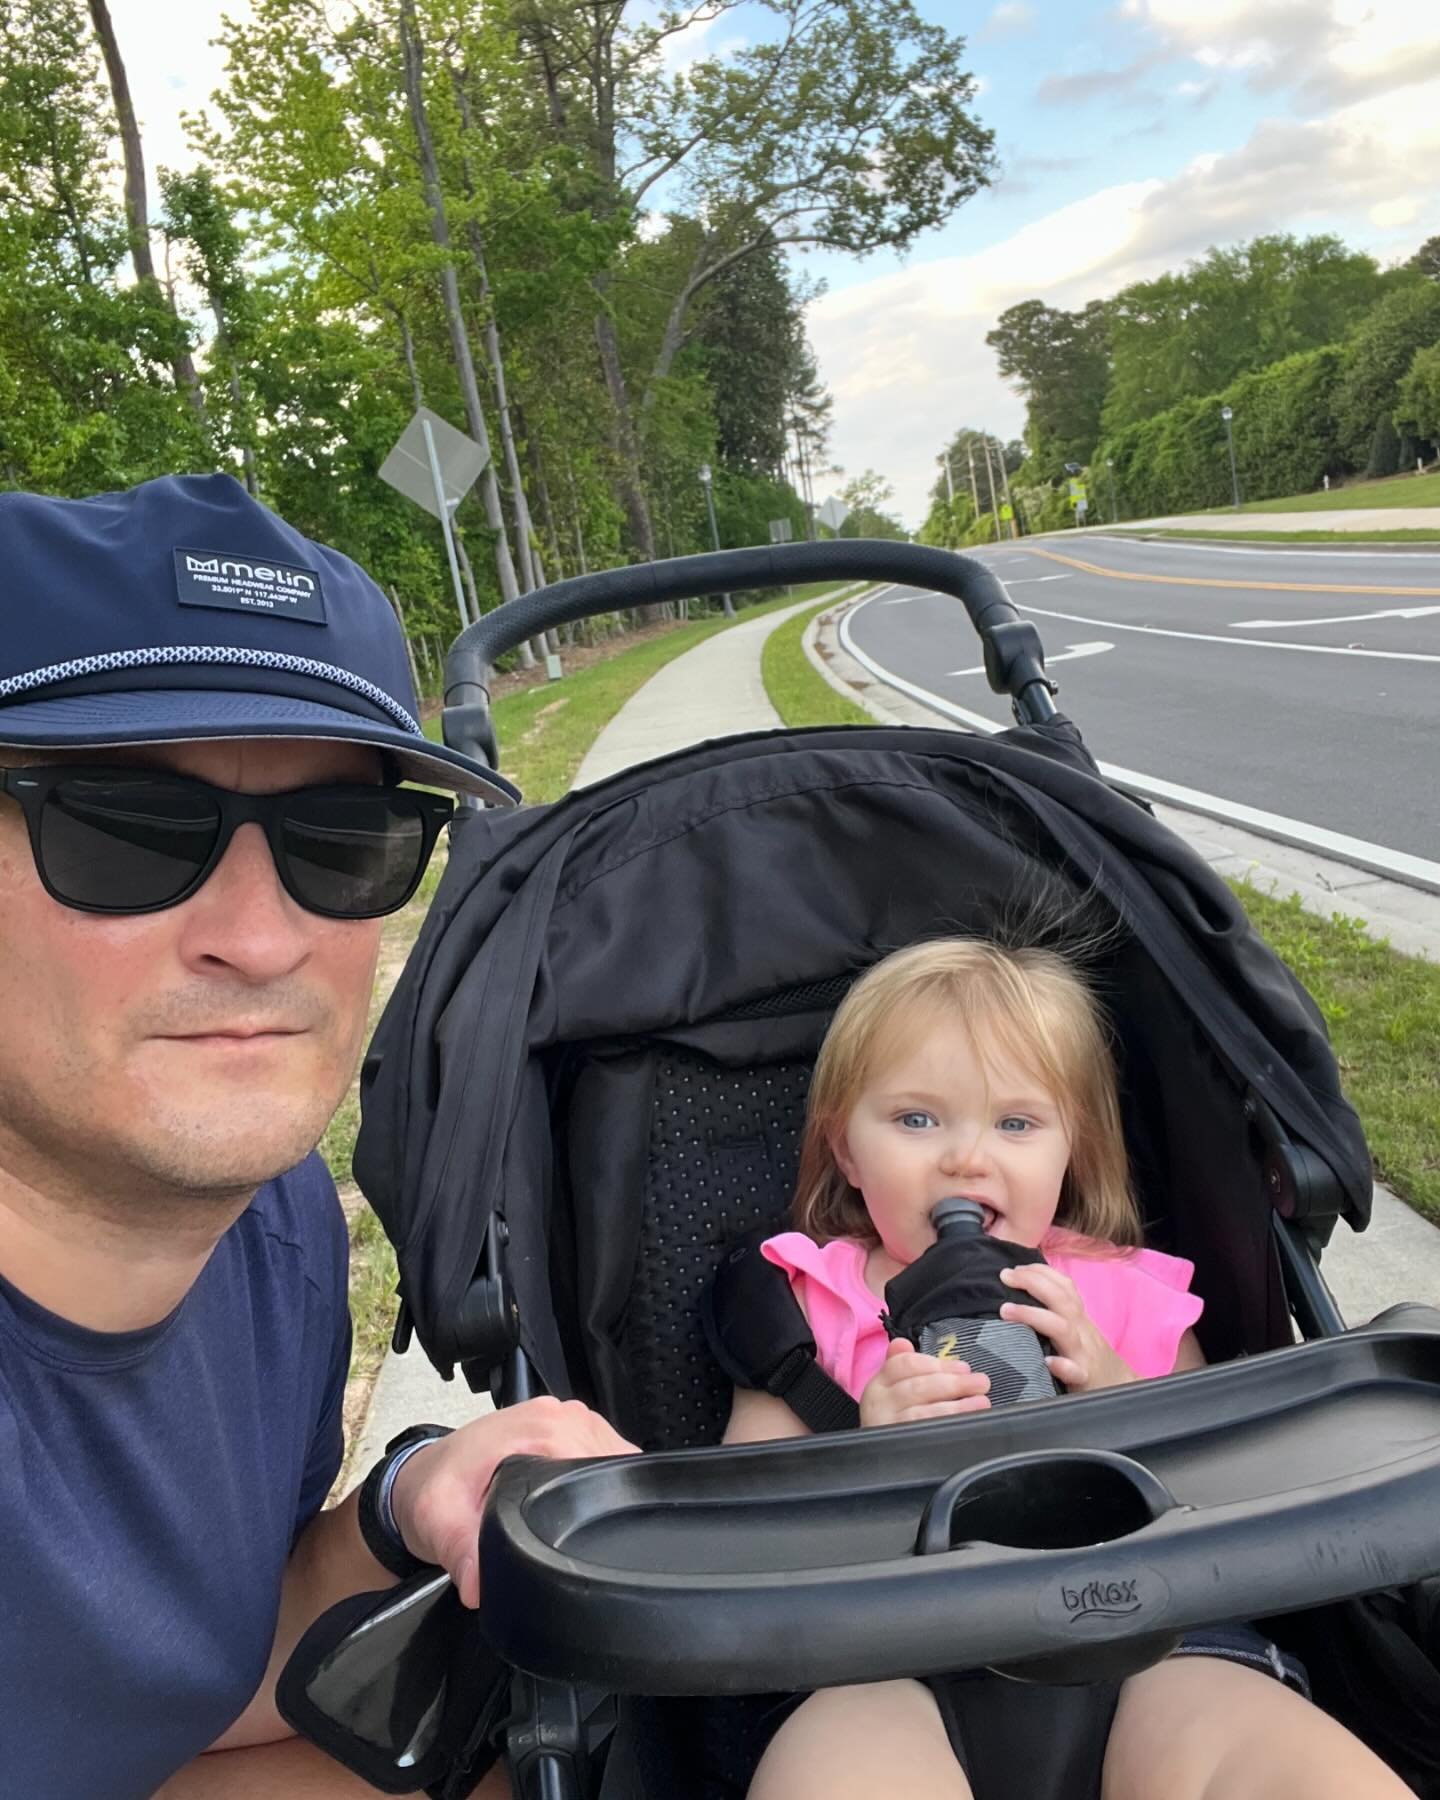 @runningsuckstc Lil Evie joined me for a #5milerun through Brookhaven. Surprisingly enough, she didn&rsquo;t ask for the iPad once! I&rsquo;ll take that as a win. 

#runner #runners #runningman #runningdad #runnersofinstagram #runningcommunity #runni